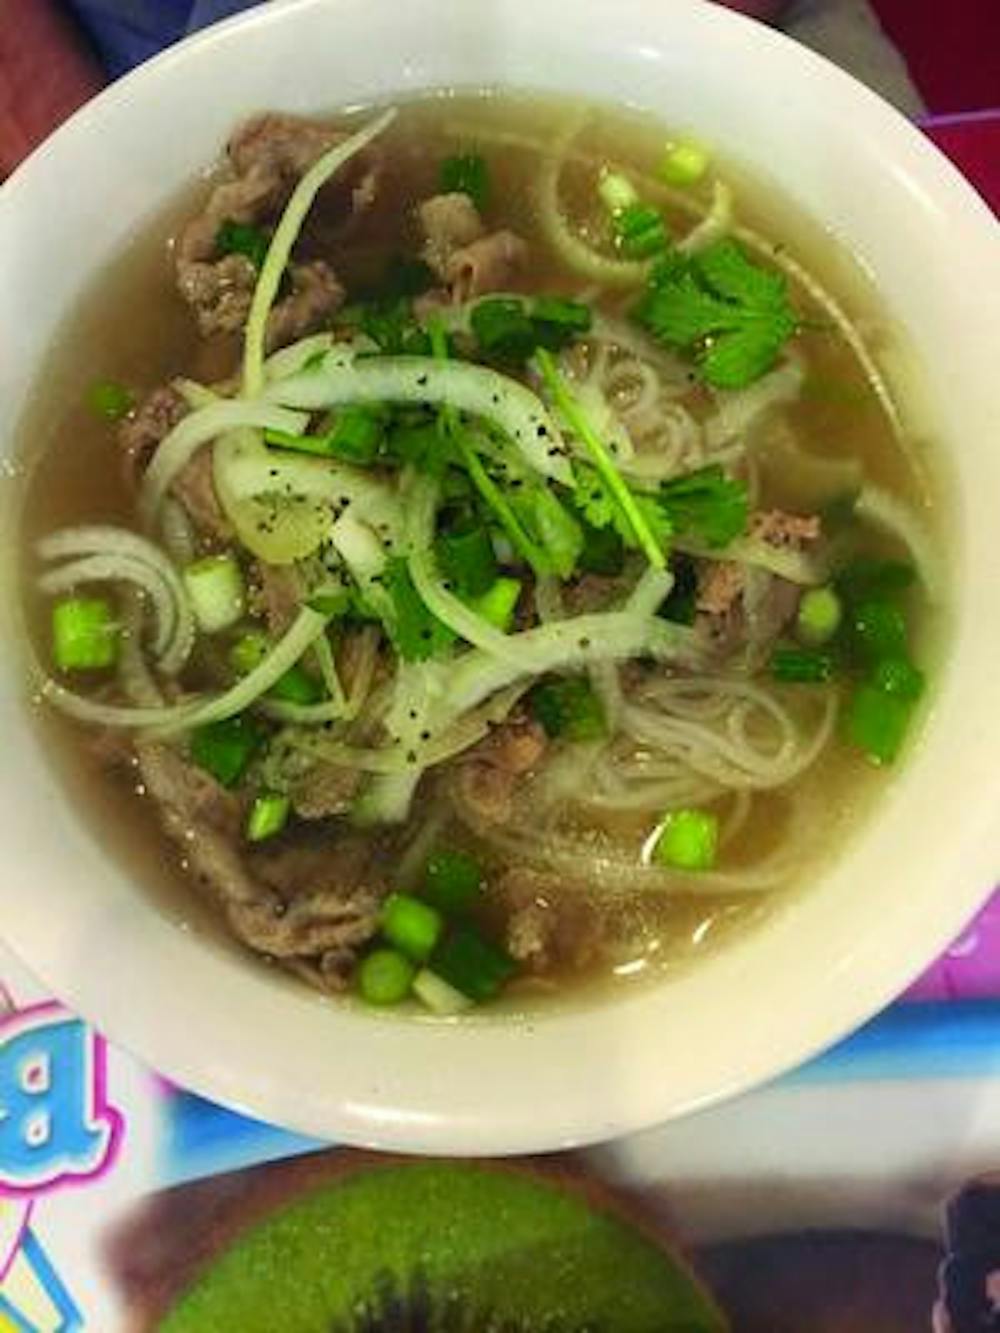 The Pho Tai is vietnamese noodle soup with eye round steak. With a little sriracha and hoisin sauce, it has just the right amount of sweet and heat.